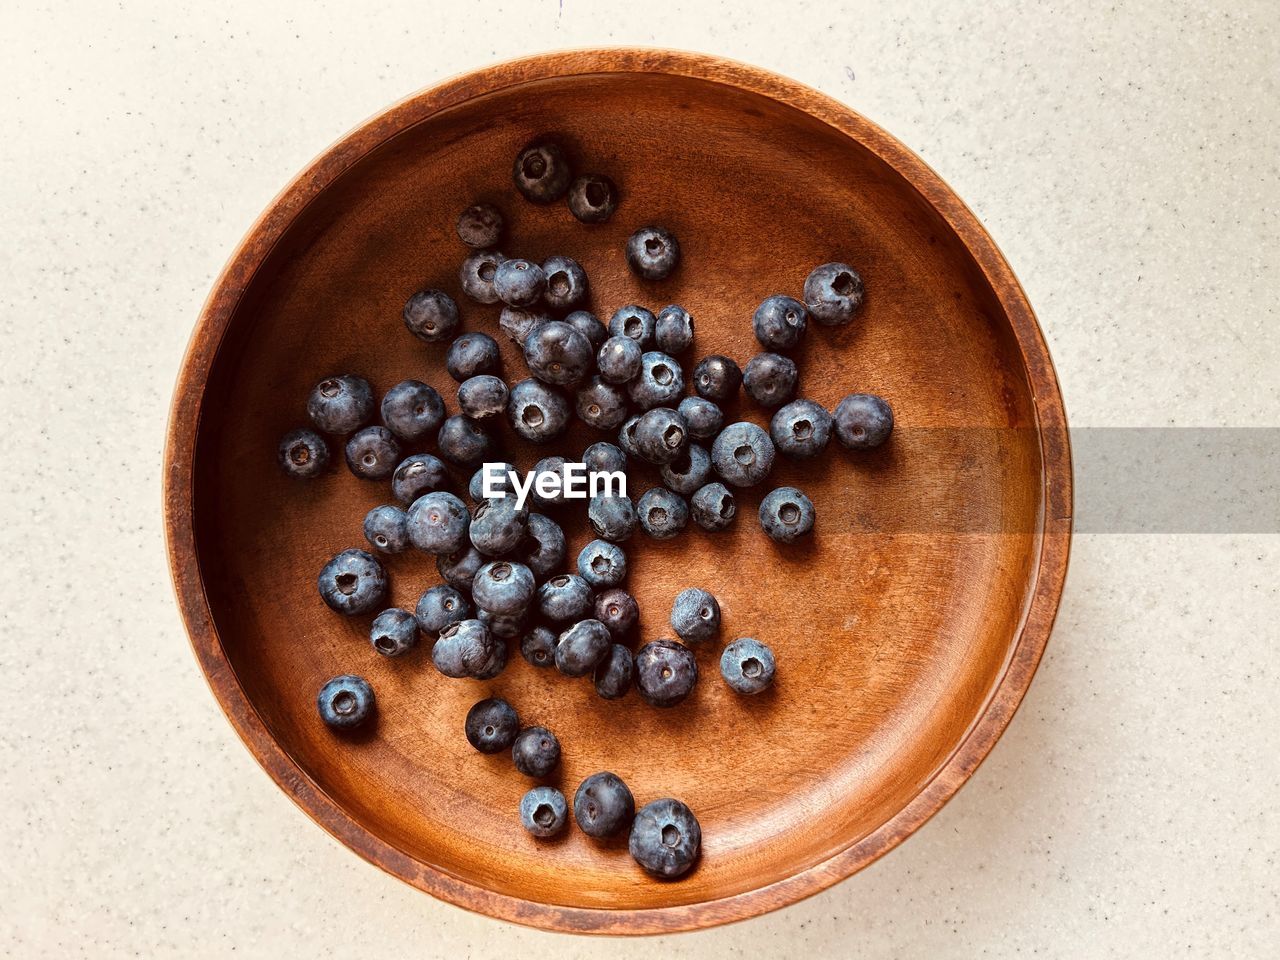  blueberries, scatter pattern, wooden bowl. fresh, colourful, juicy, sweet, nutritious, summer fruit.